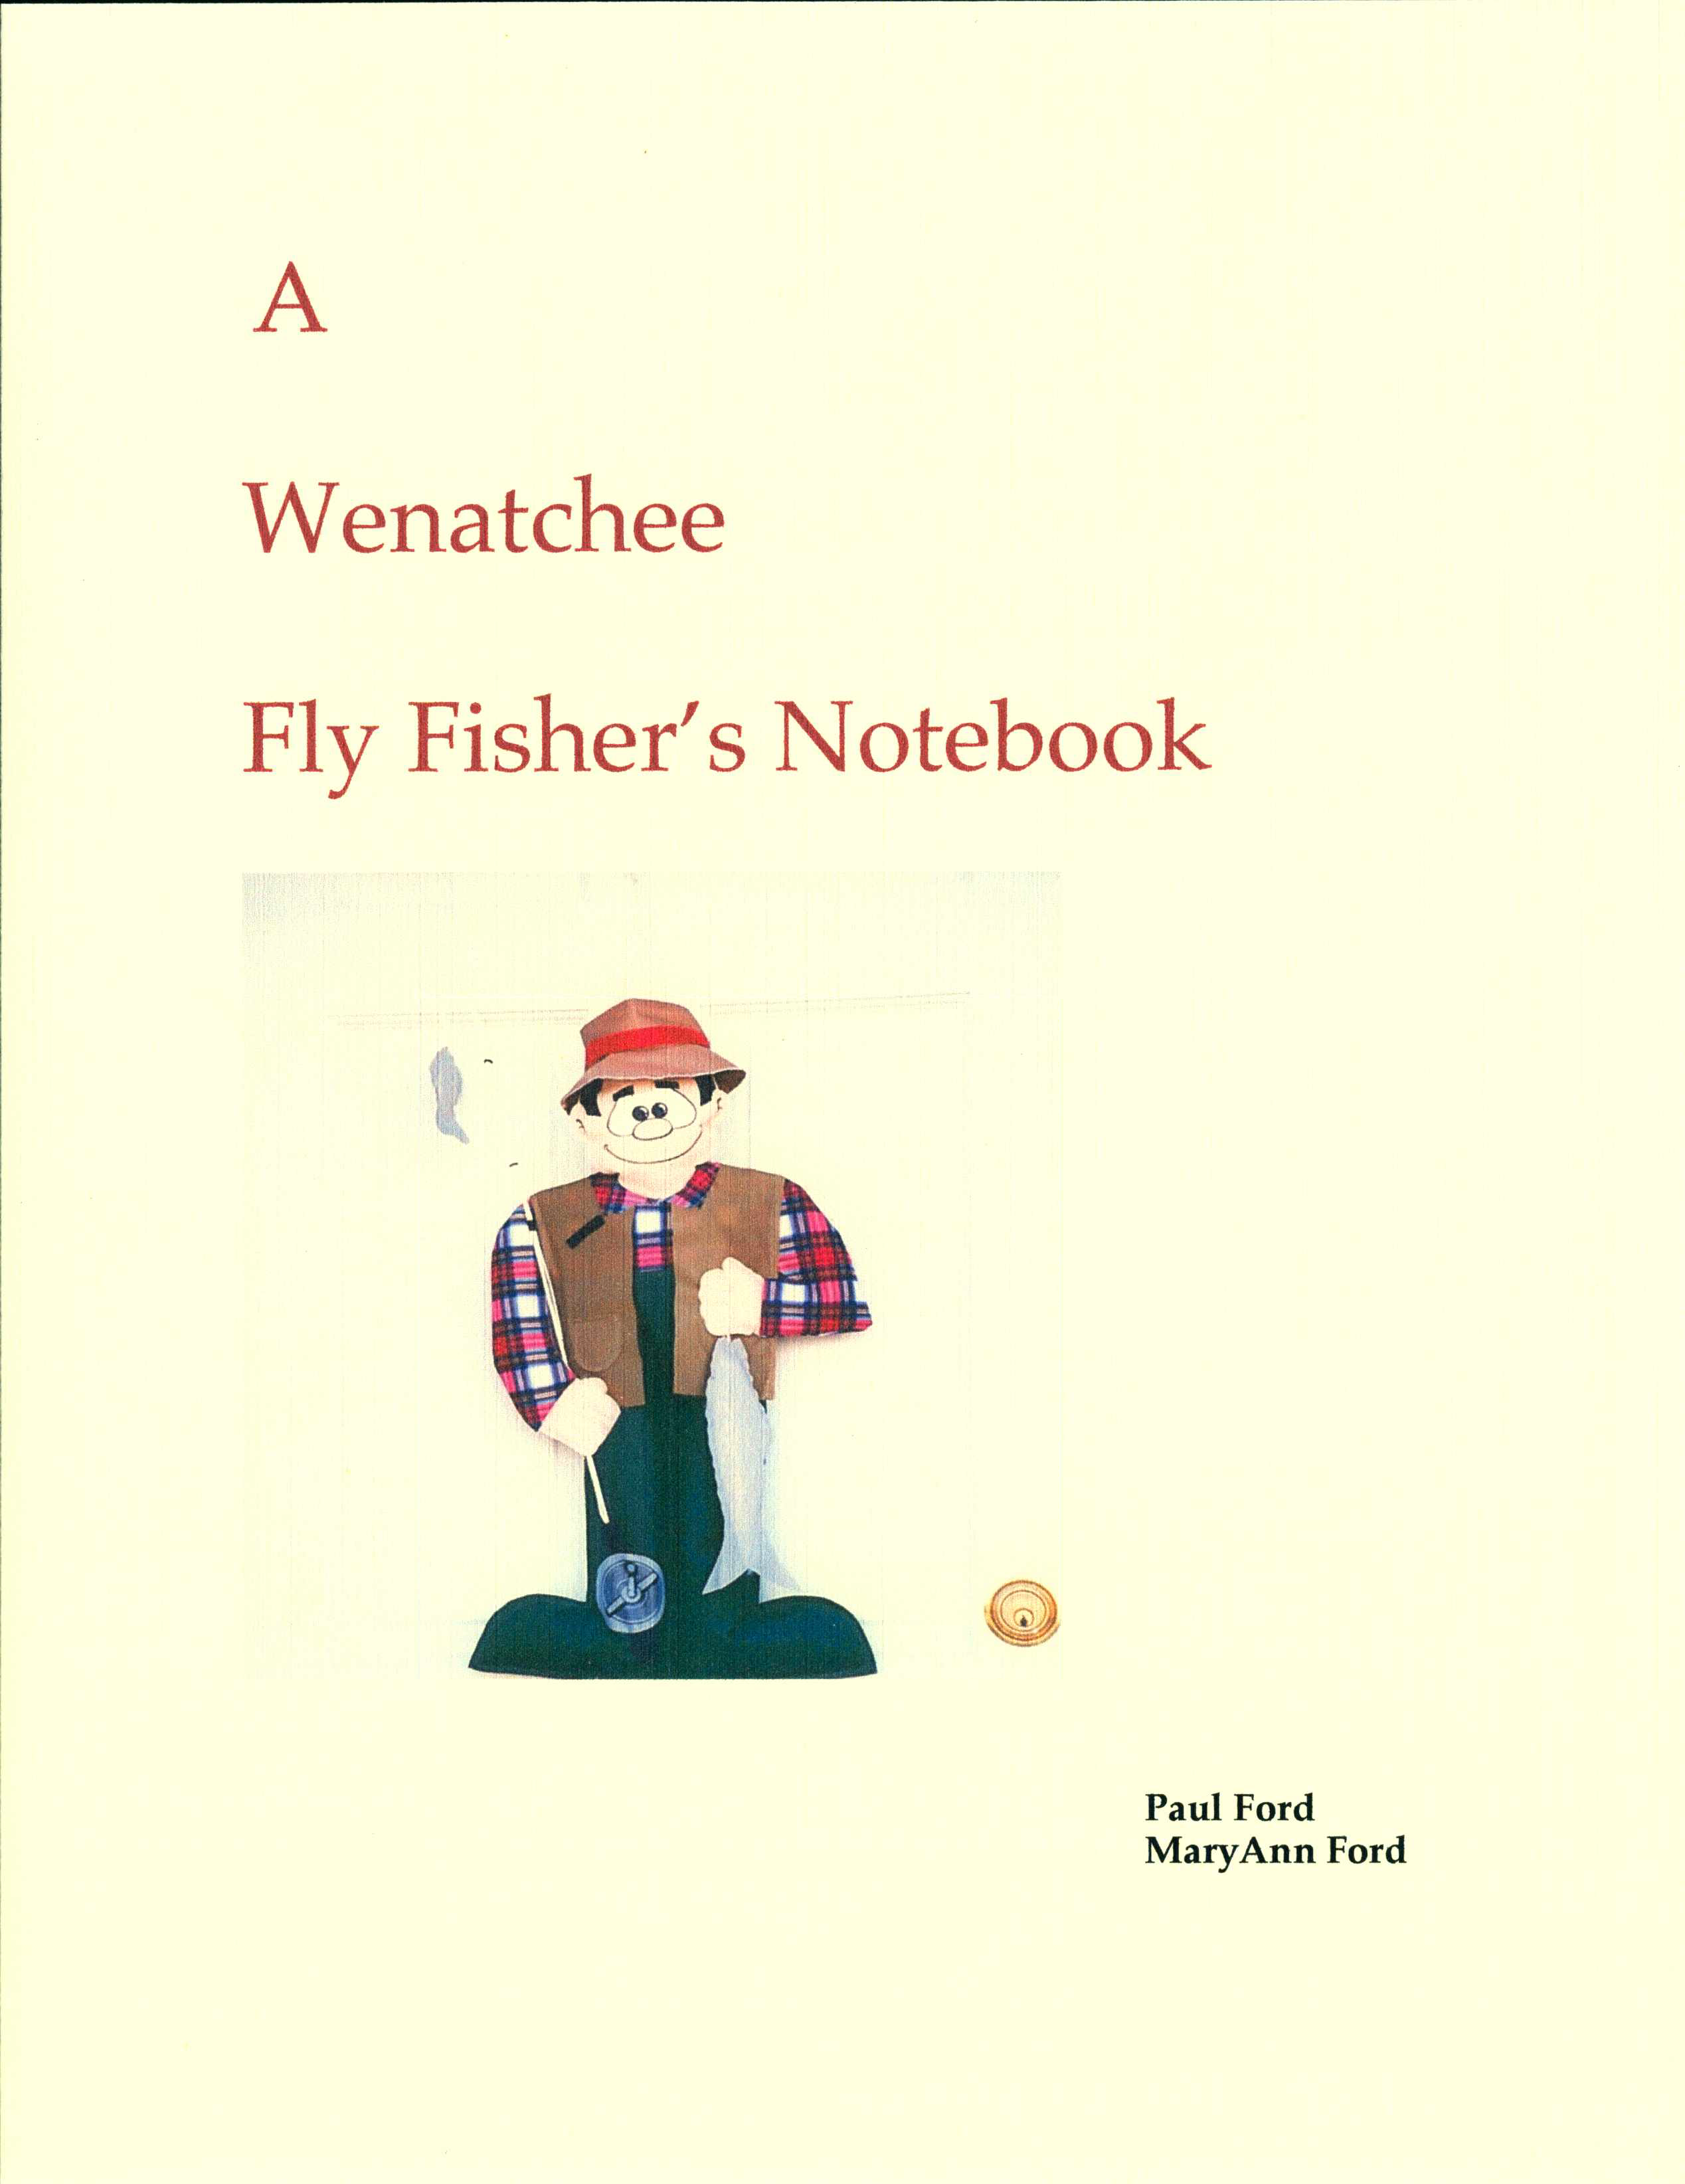 A Wenatchee Fly Fisher's Notebook